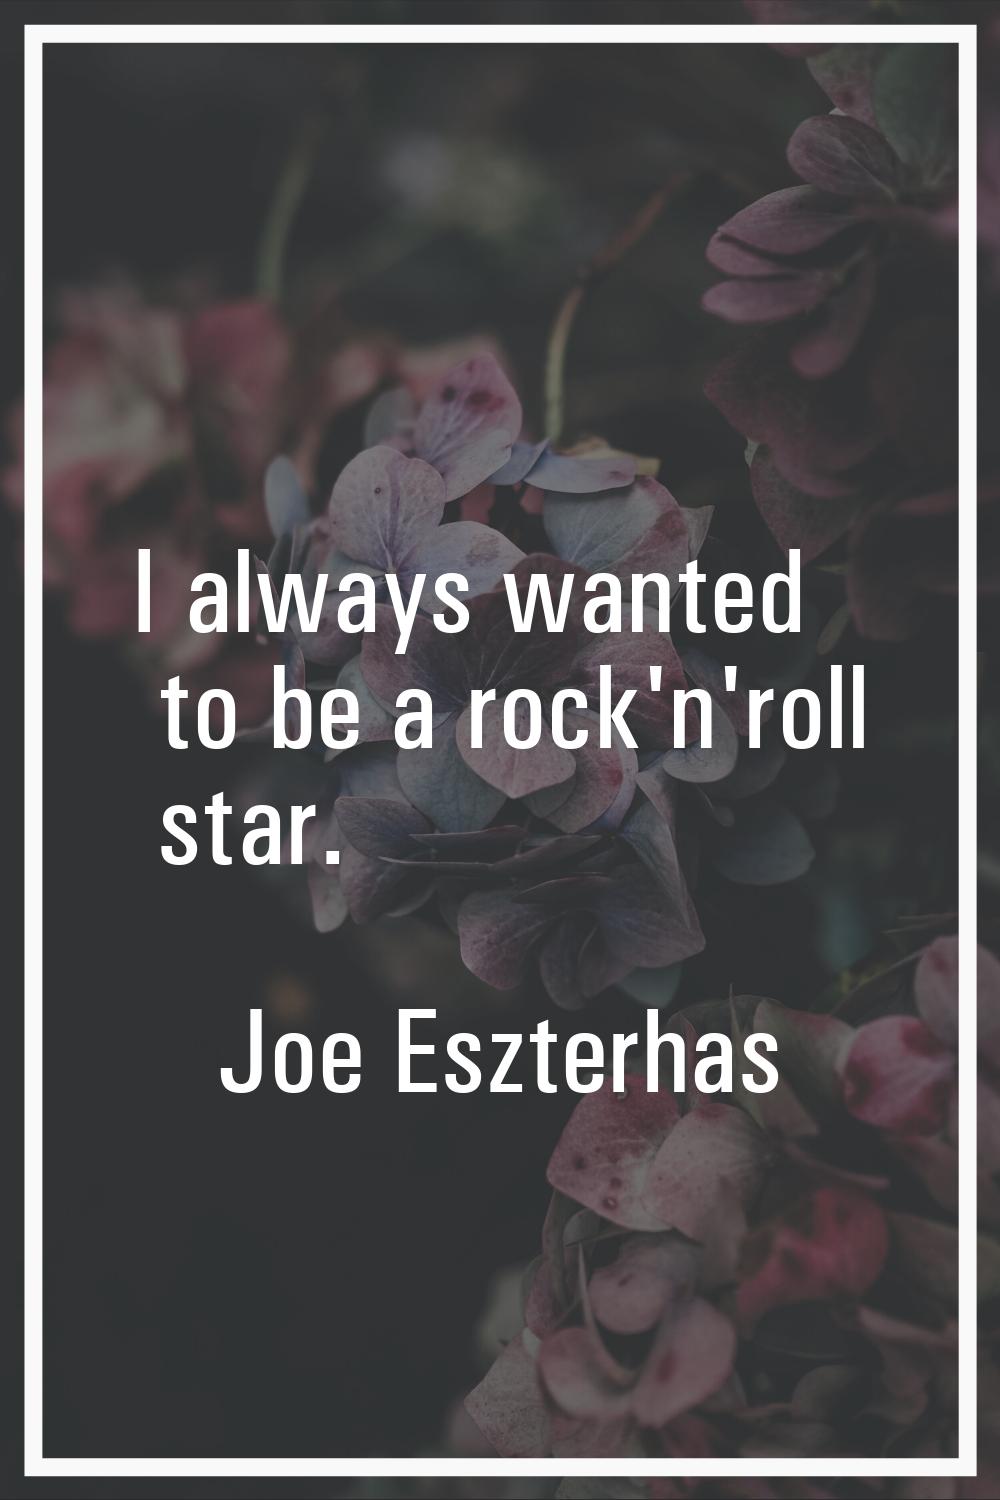 I always wanted to be a rock'n'roll star.